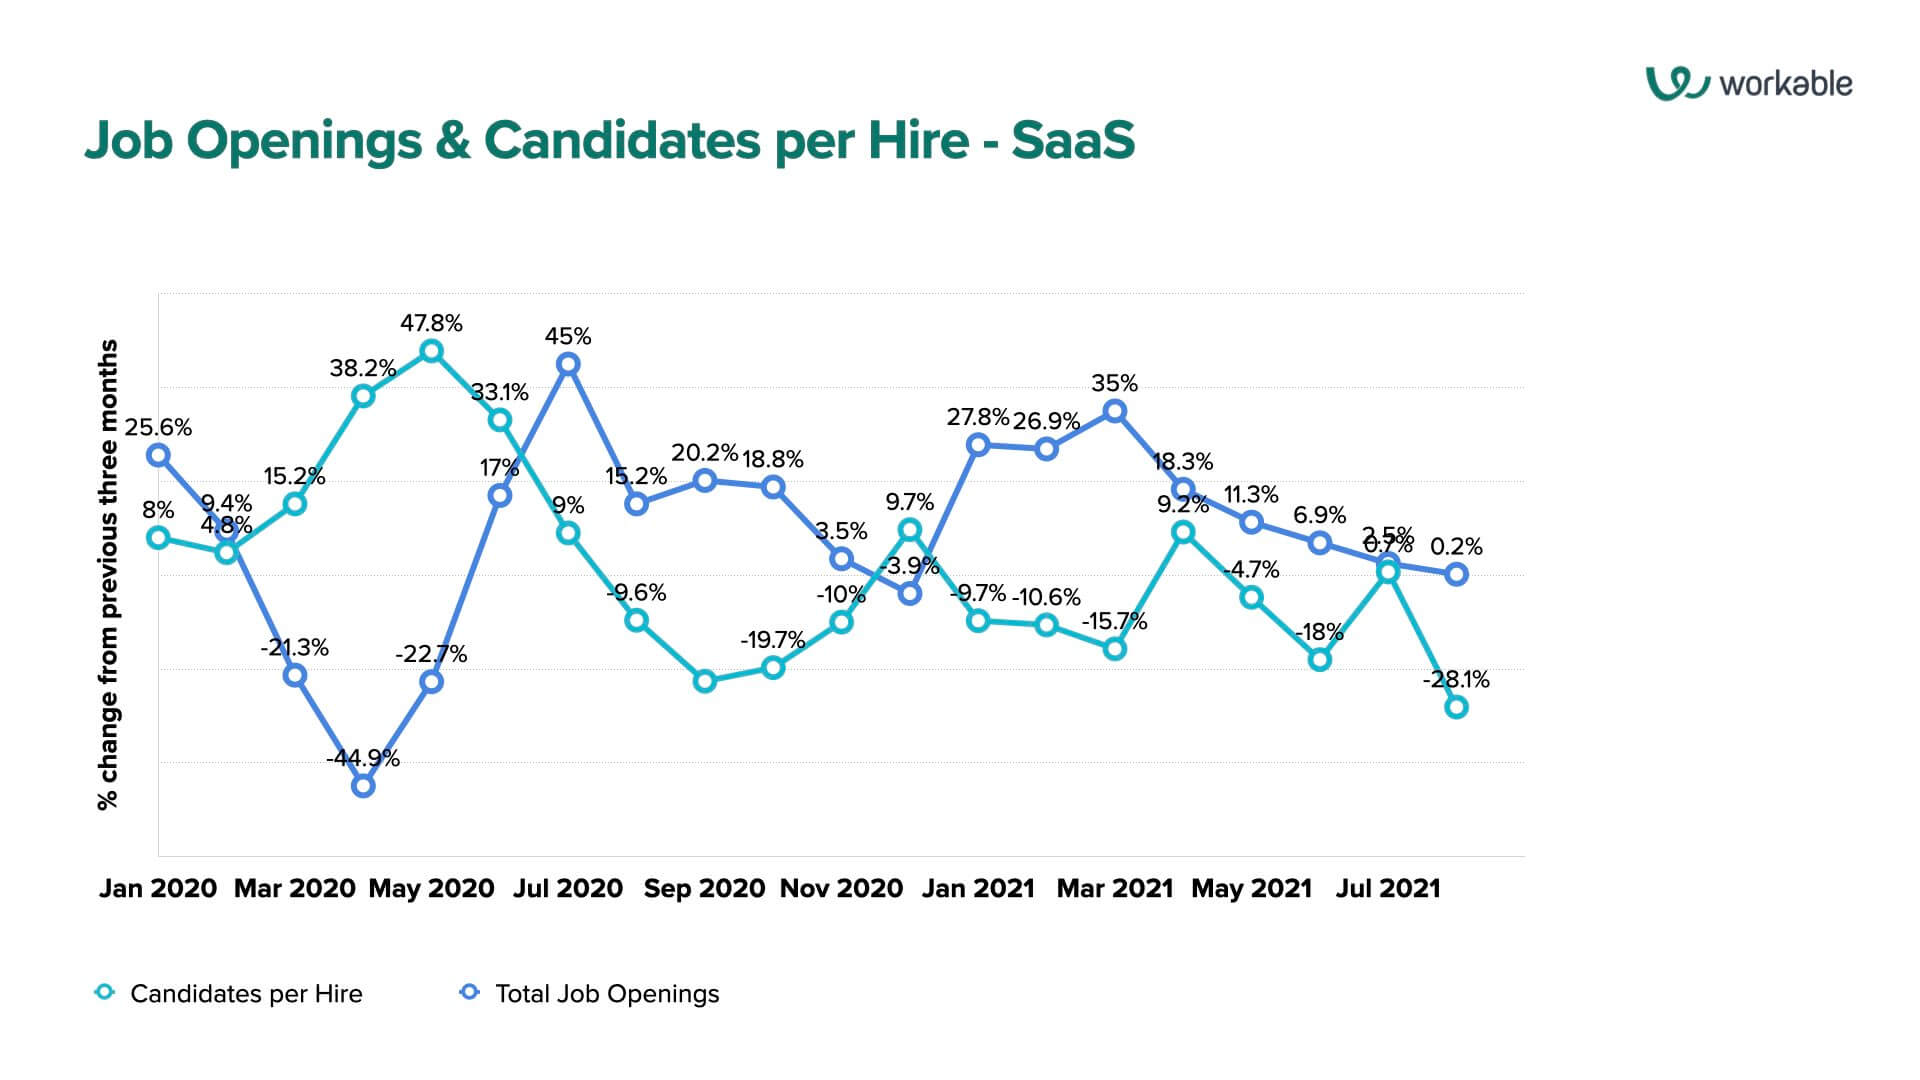 Job Openings & Candidates per Hire - SaaS